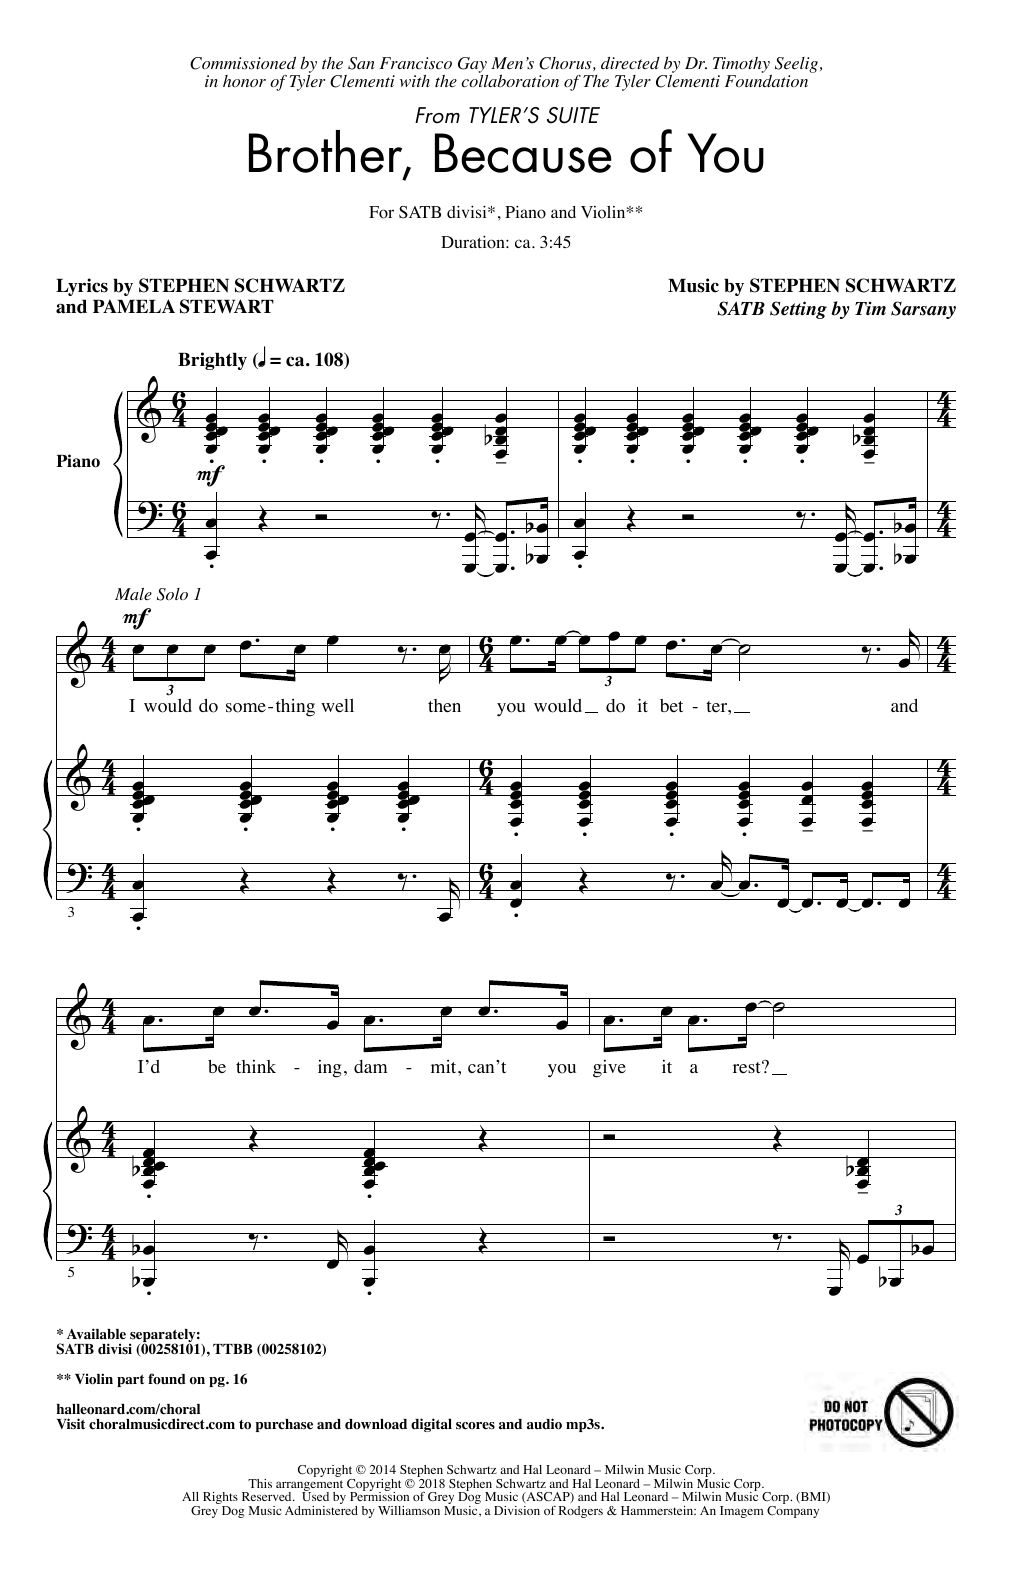 Download Stephen Schwartz Brother, Because Of You (from Tyler's S Sheet Music